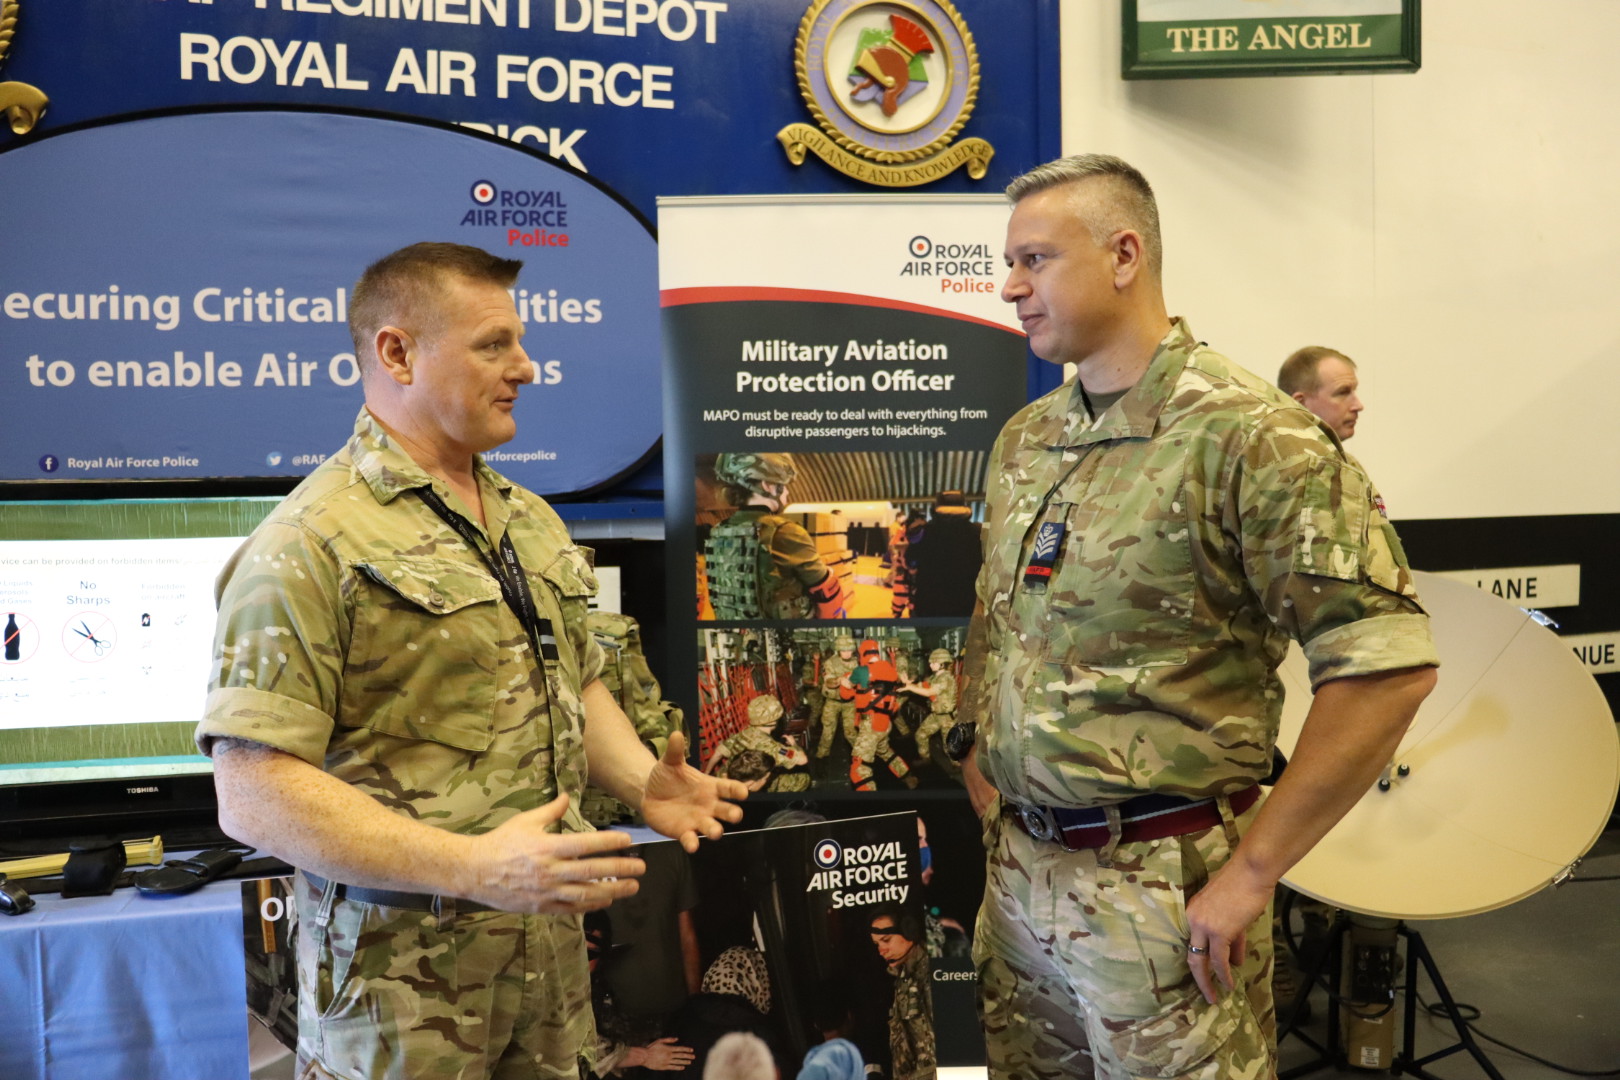 Commander Global Enablement talking to RAF Police personnel